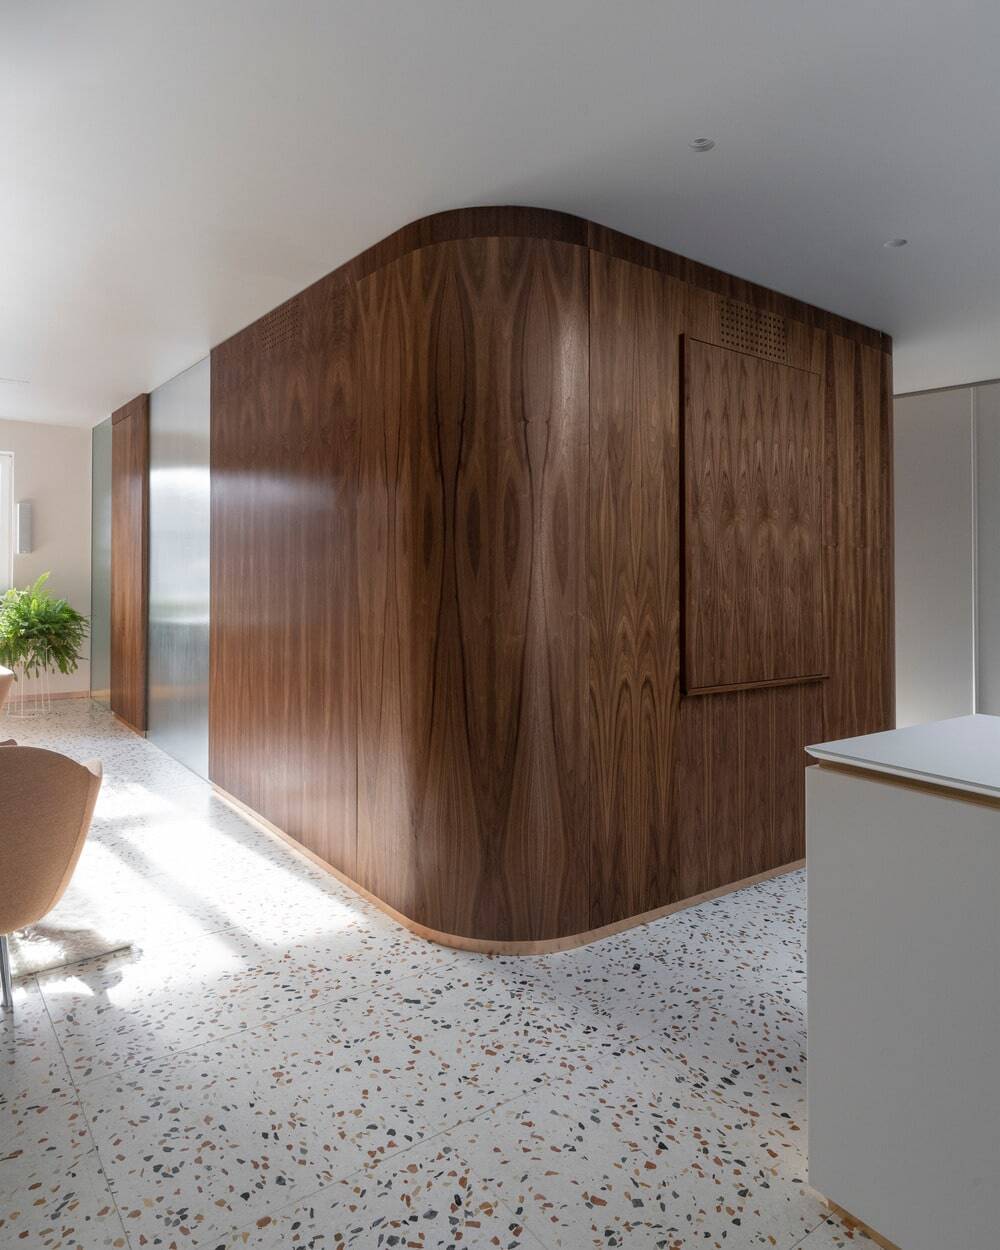 Central walnut core, Dupont Blouin Architects